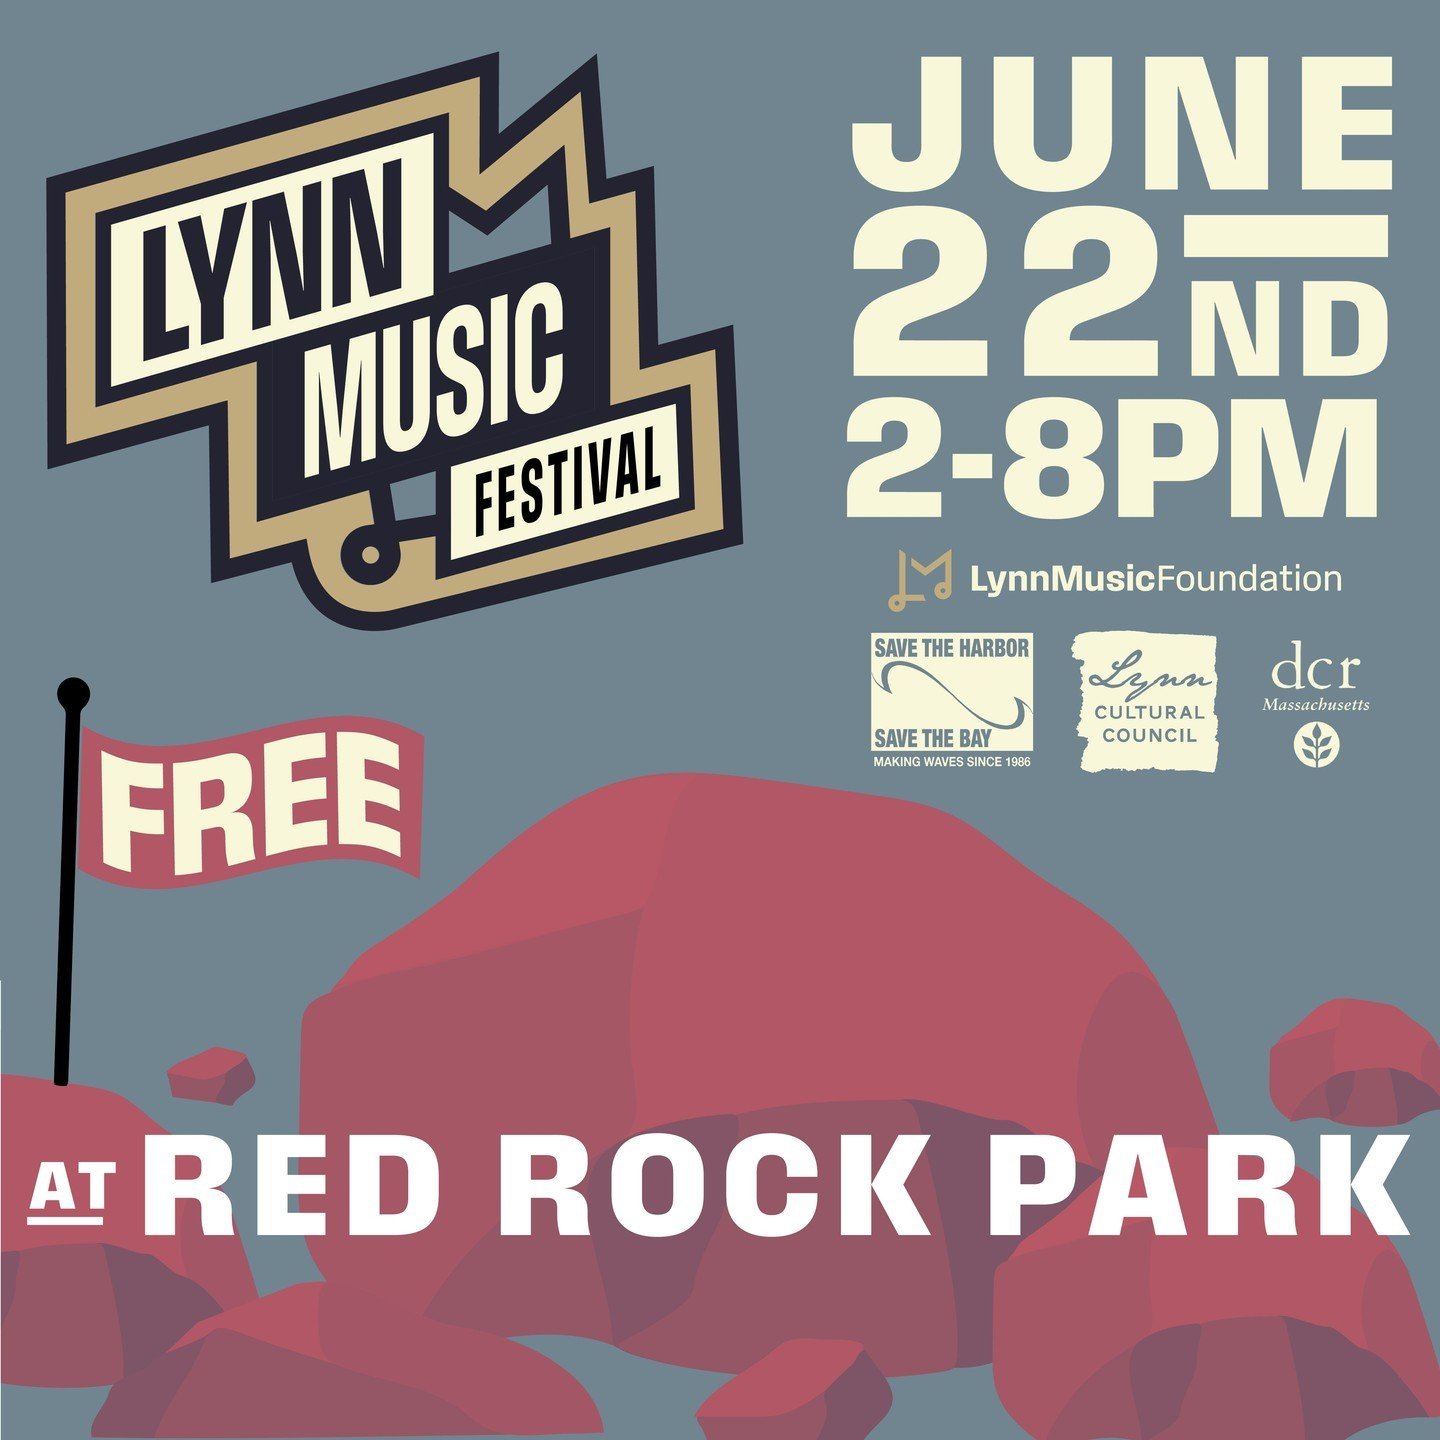 We are currently reviewing submissions for performers for our Lynn Music Festival! We have set a deadline of May 15th for submissions! If you haven't submitted yet check our link in bio or follow the link here: https://buff.ly/4aZDX4W